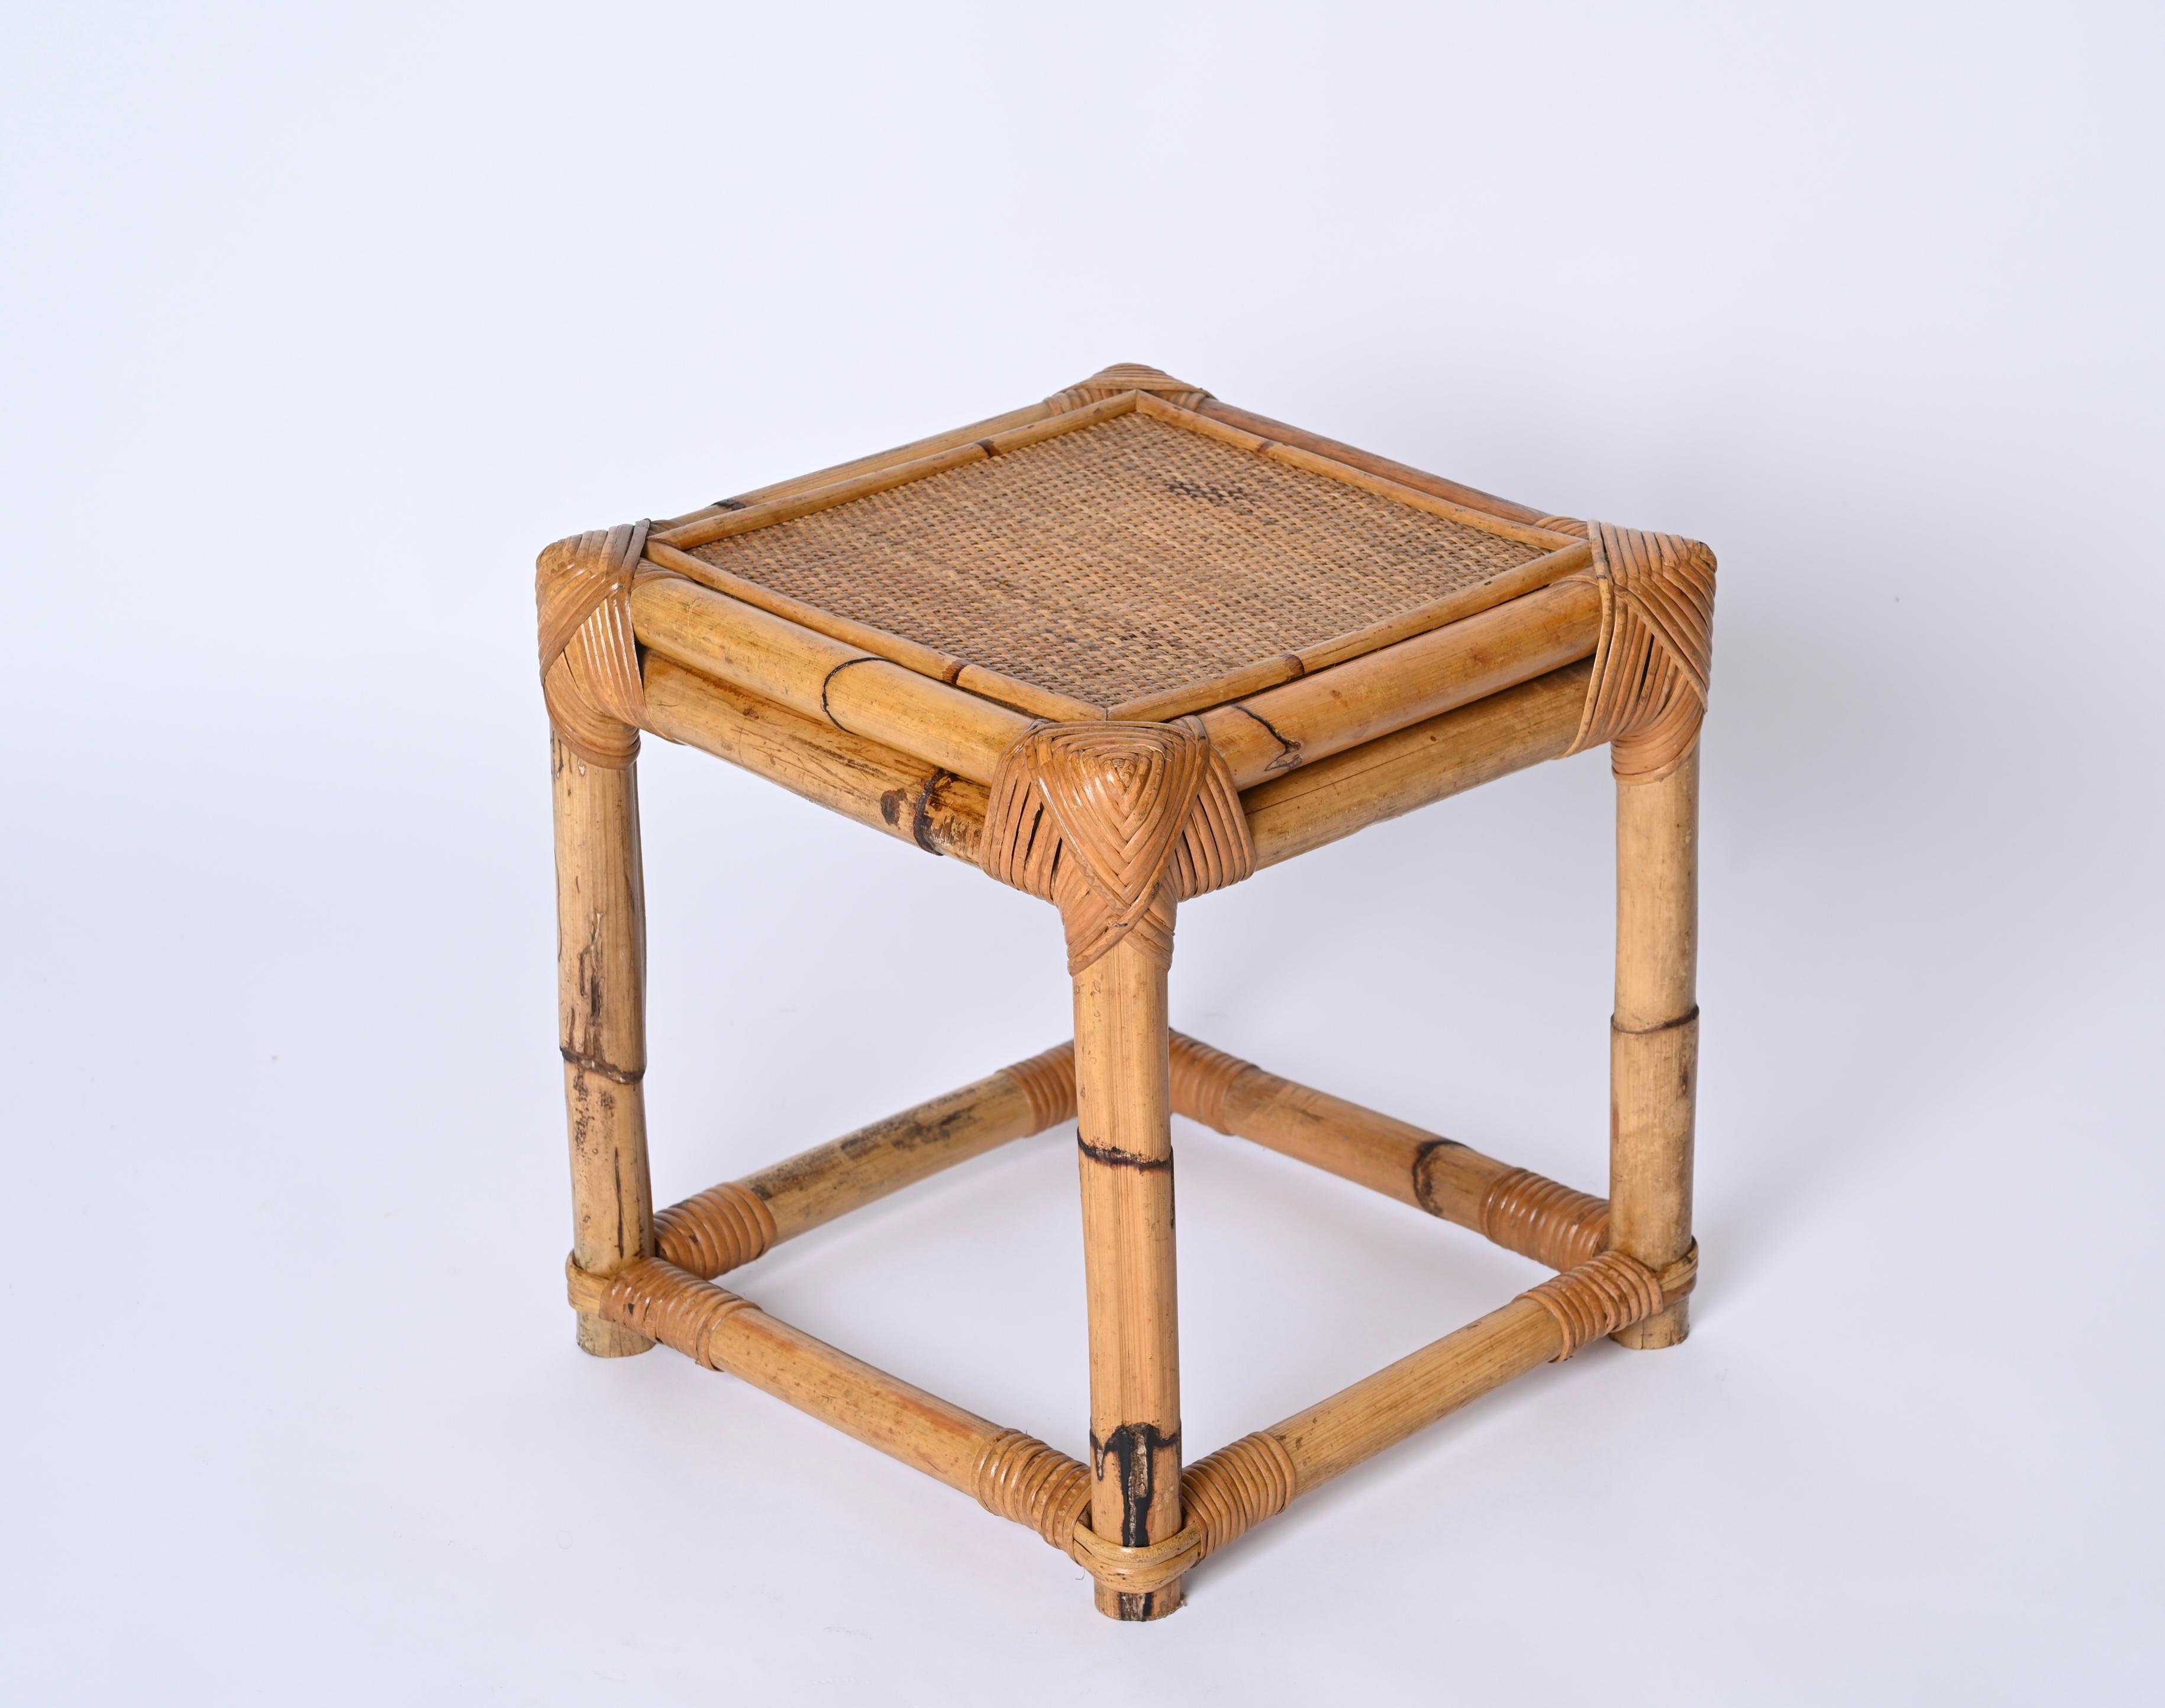 Italian Midcentury Cube Side Table or Pouf in Bamboo and Rattan, 1970s For Sale 5